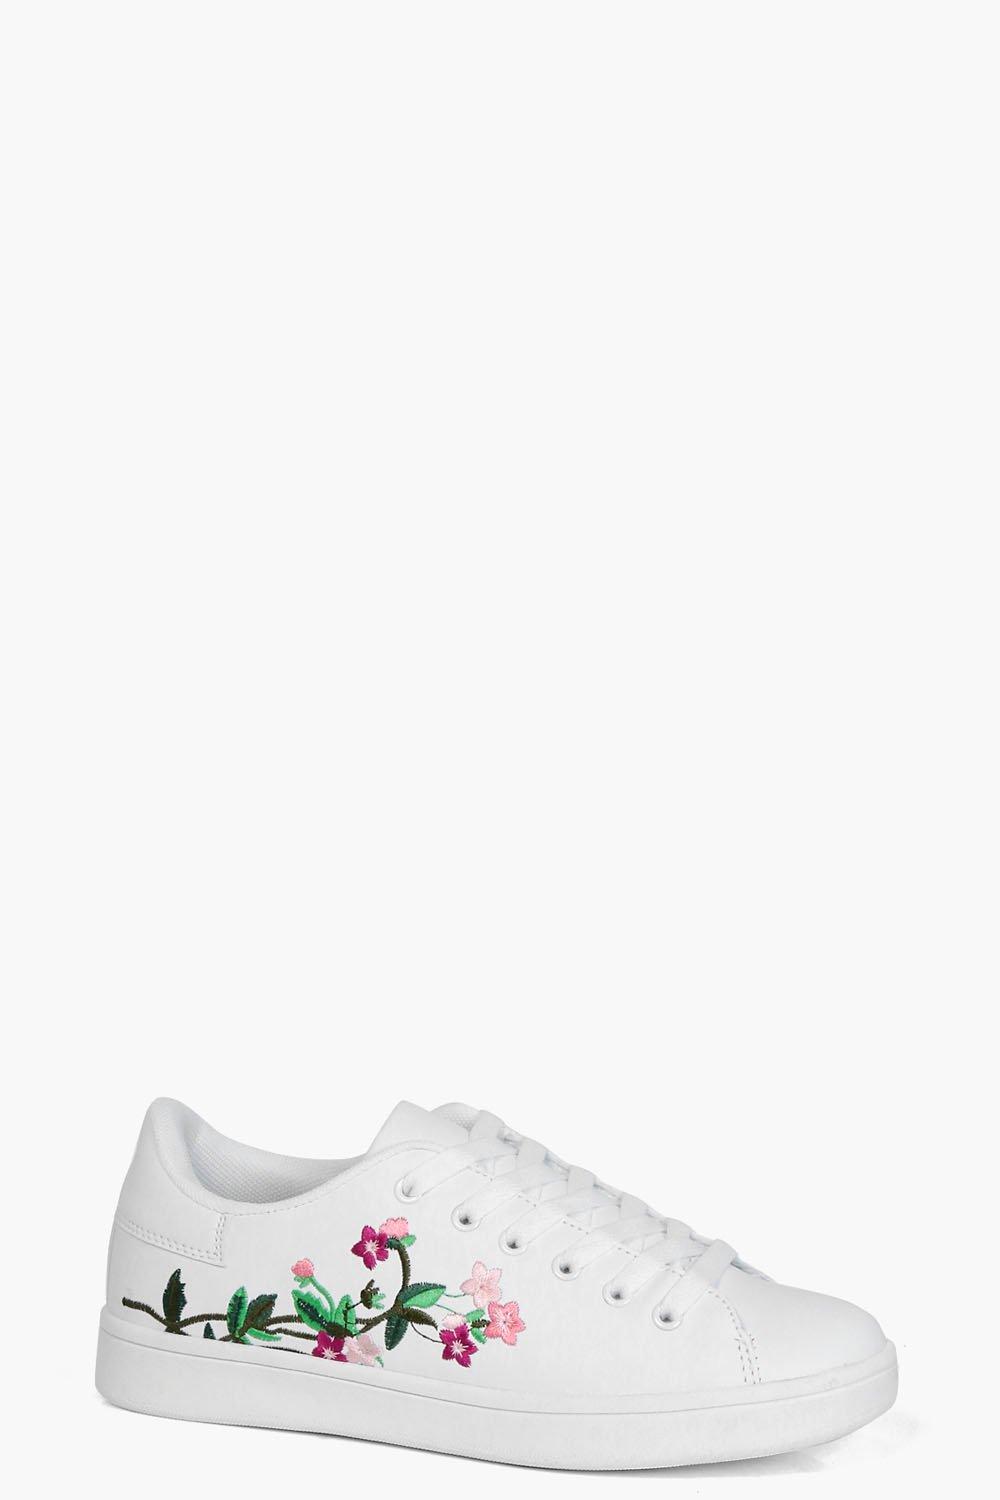 Freya Floral Embroidered Trainers | boohoo